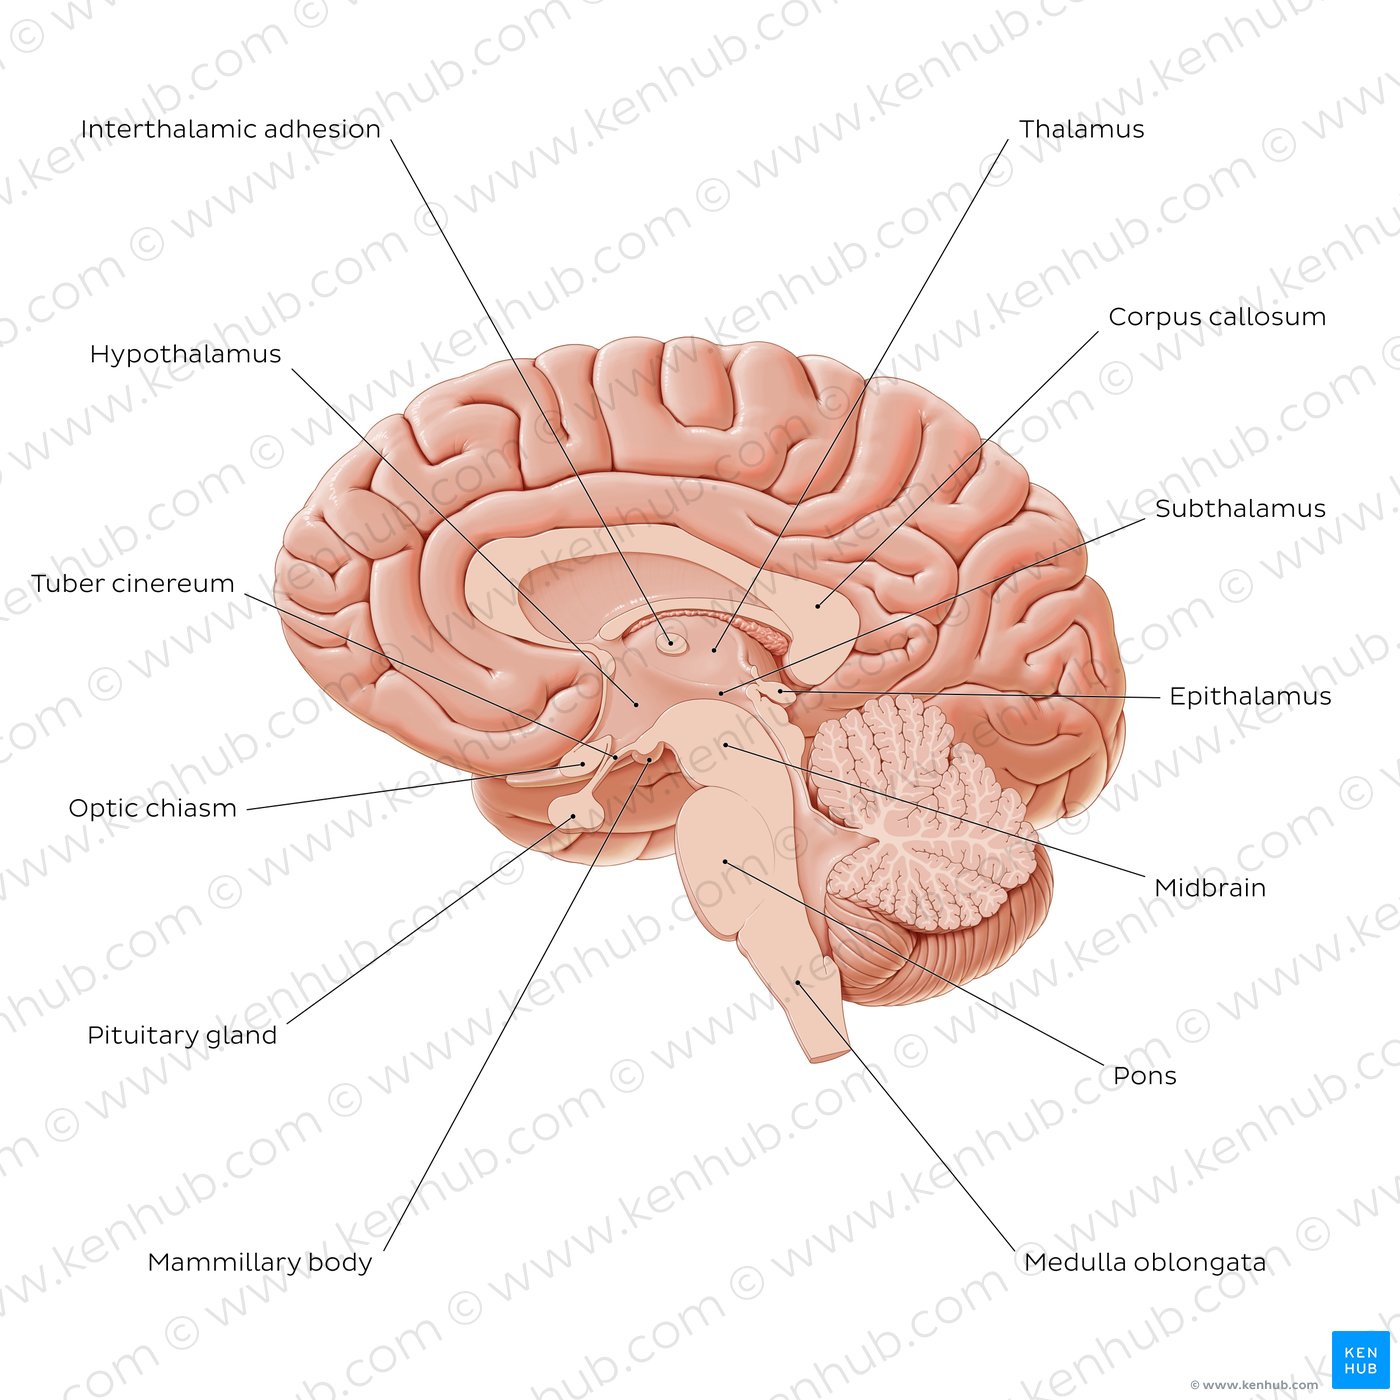 Overview of diencephalon